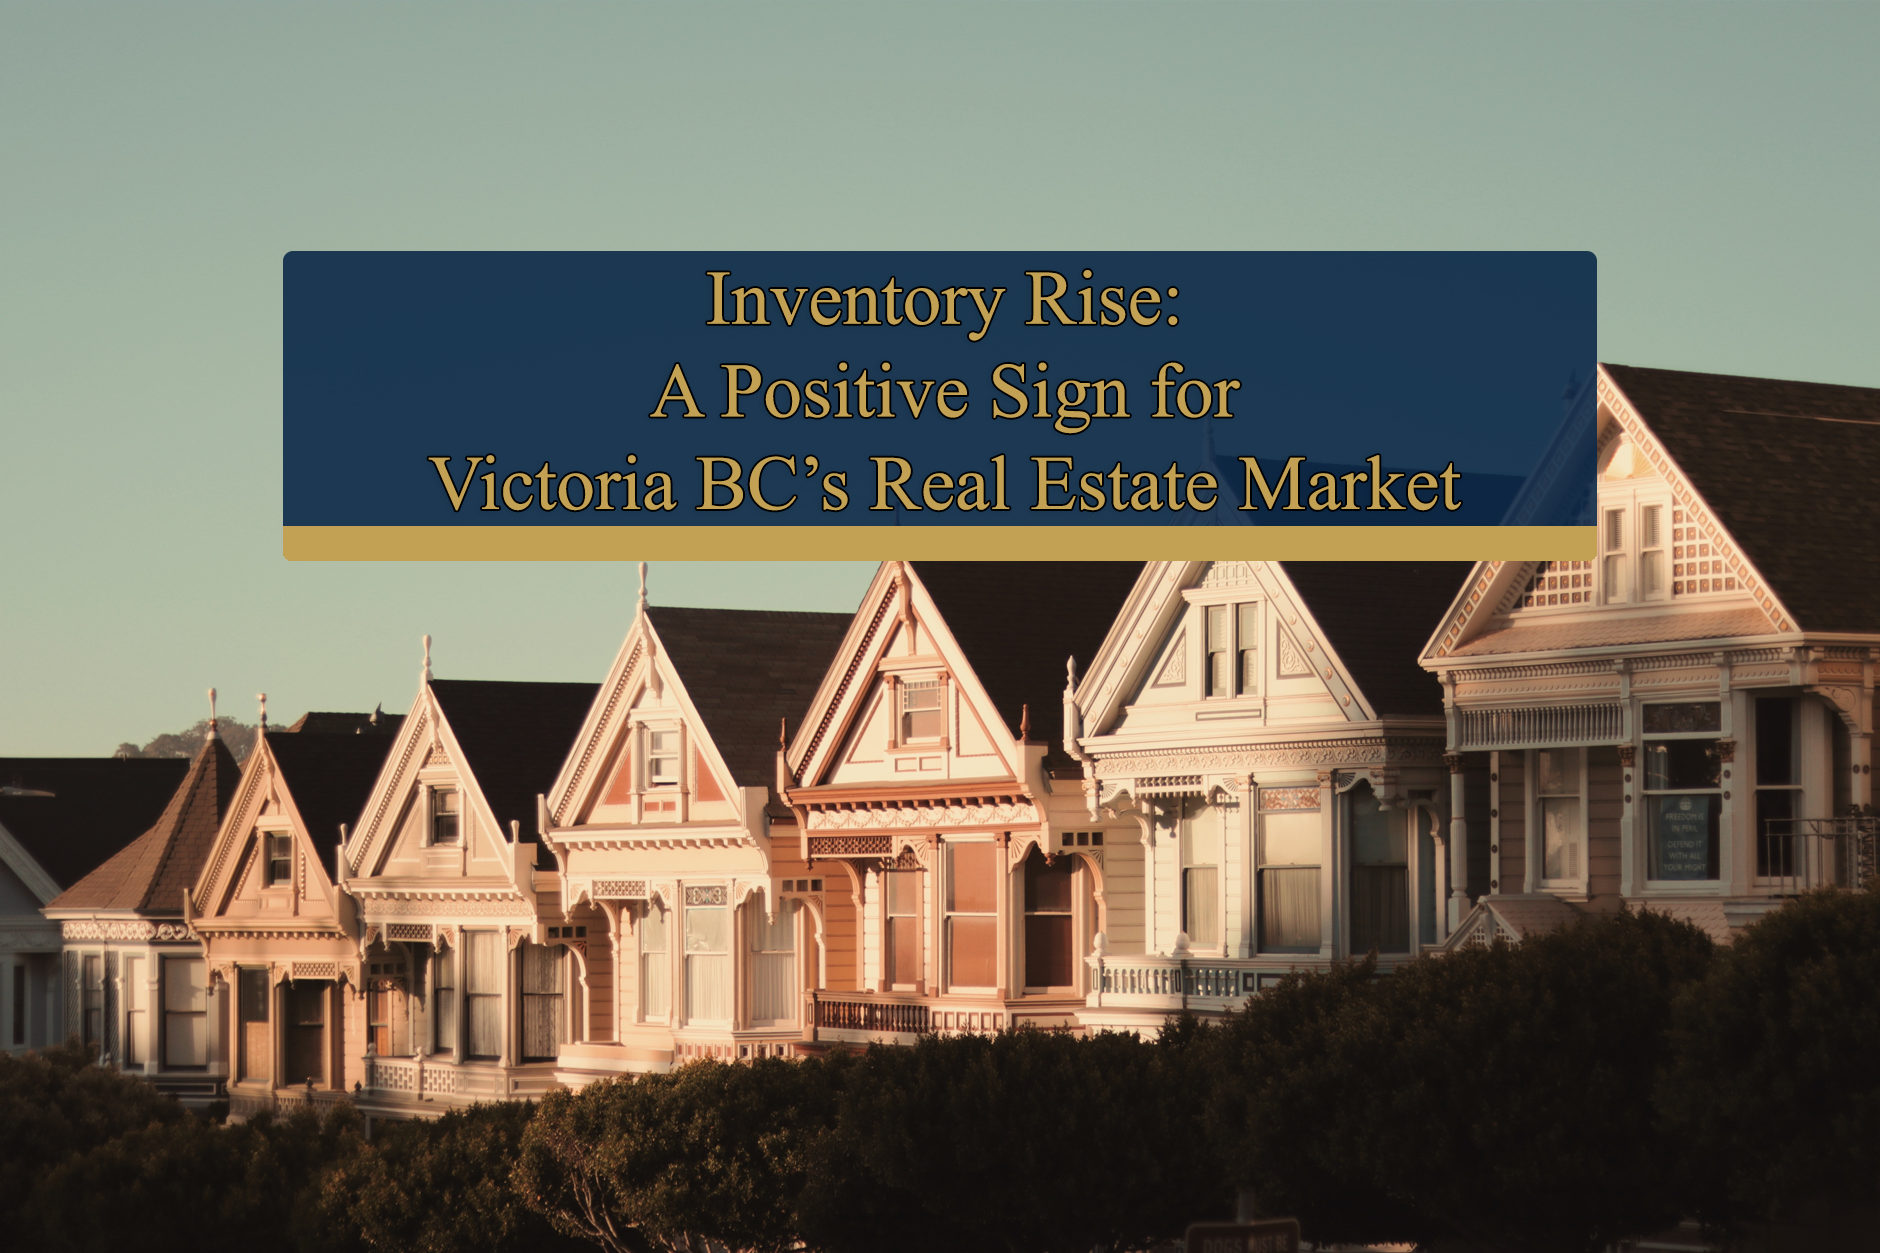 Inventory Rise: A Positive Sign for Victoria's Real Estate Market